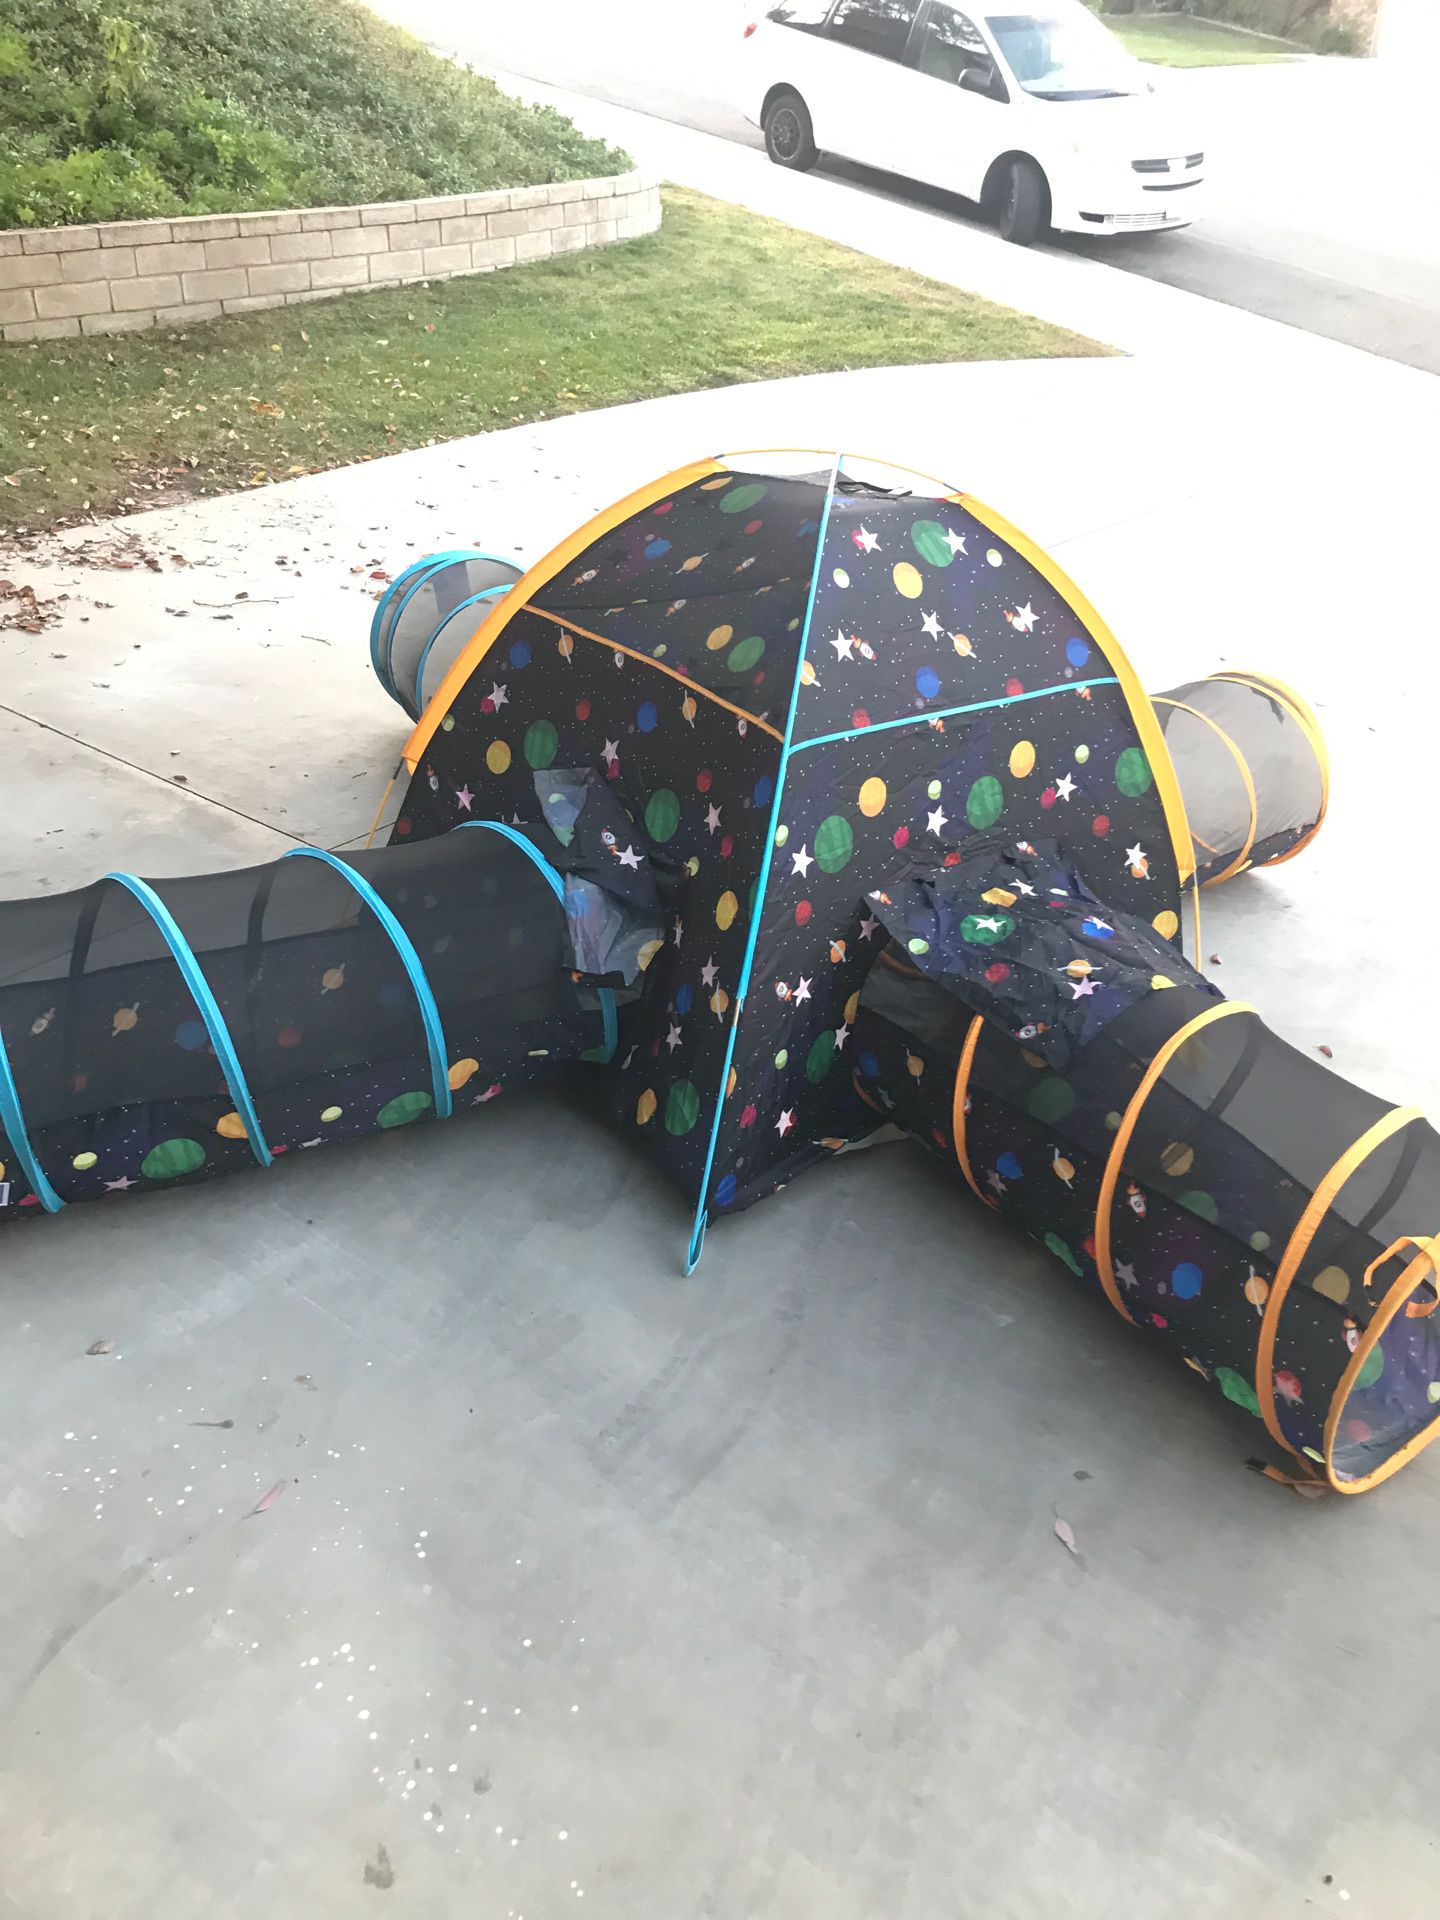 Kids tent with tunnels